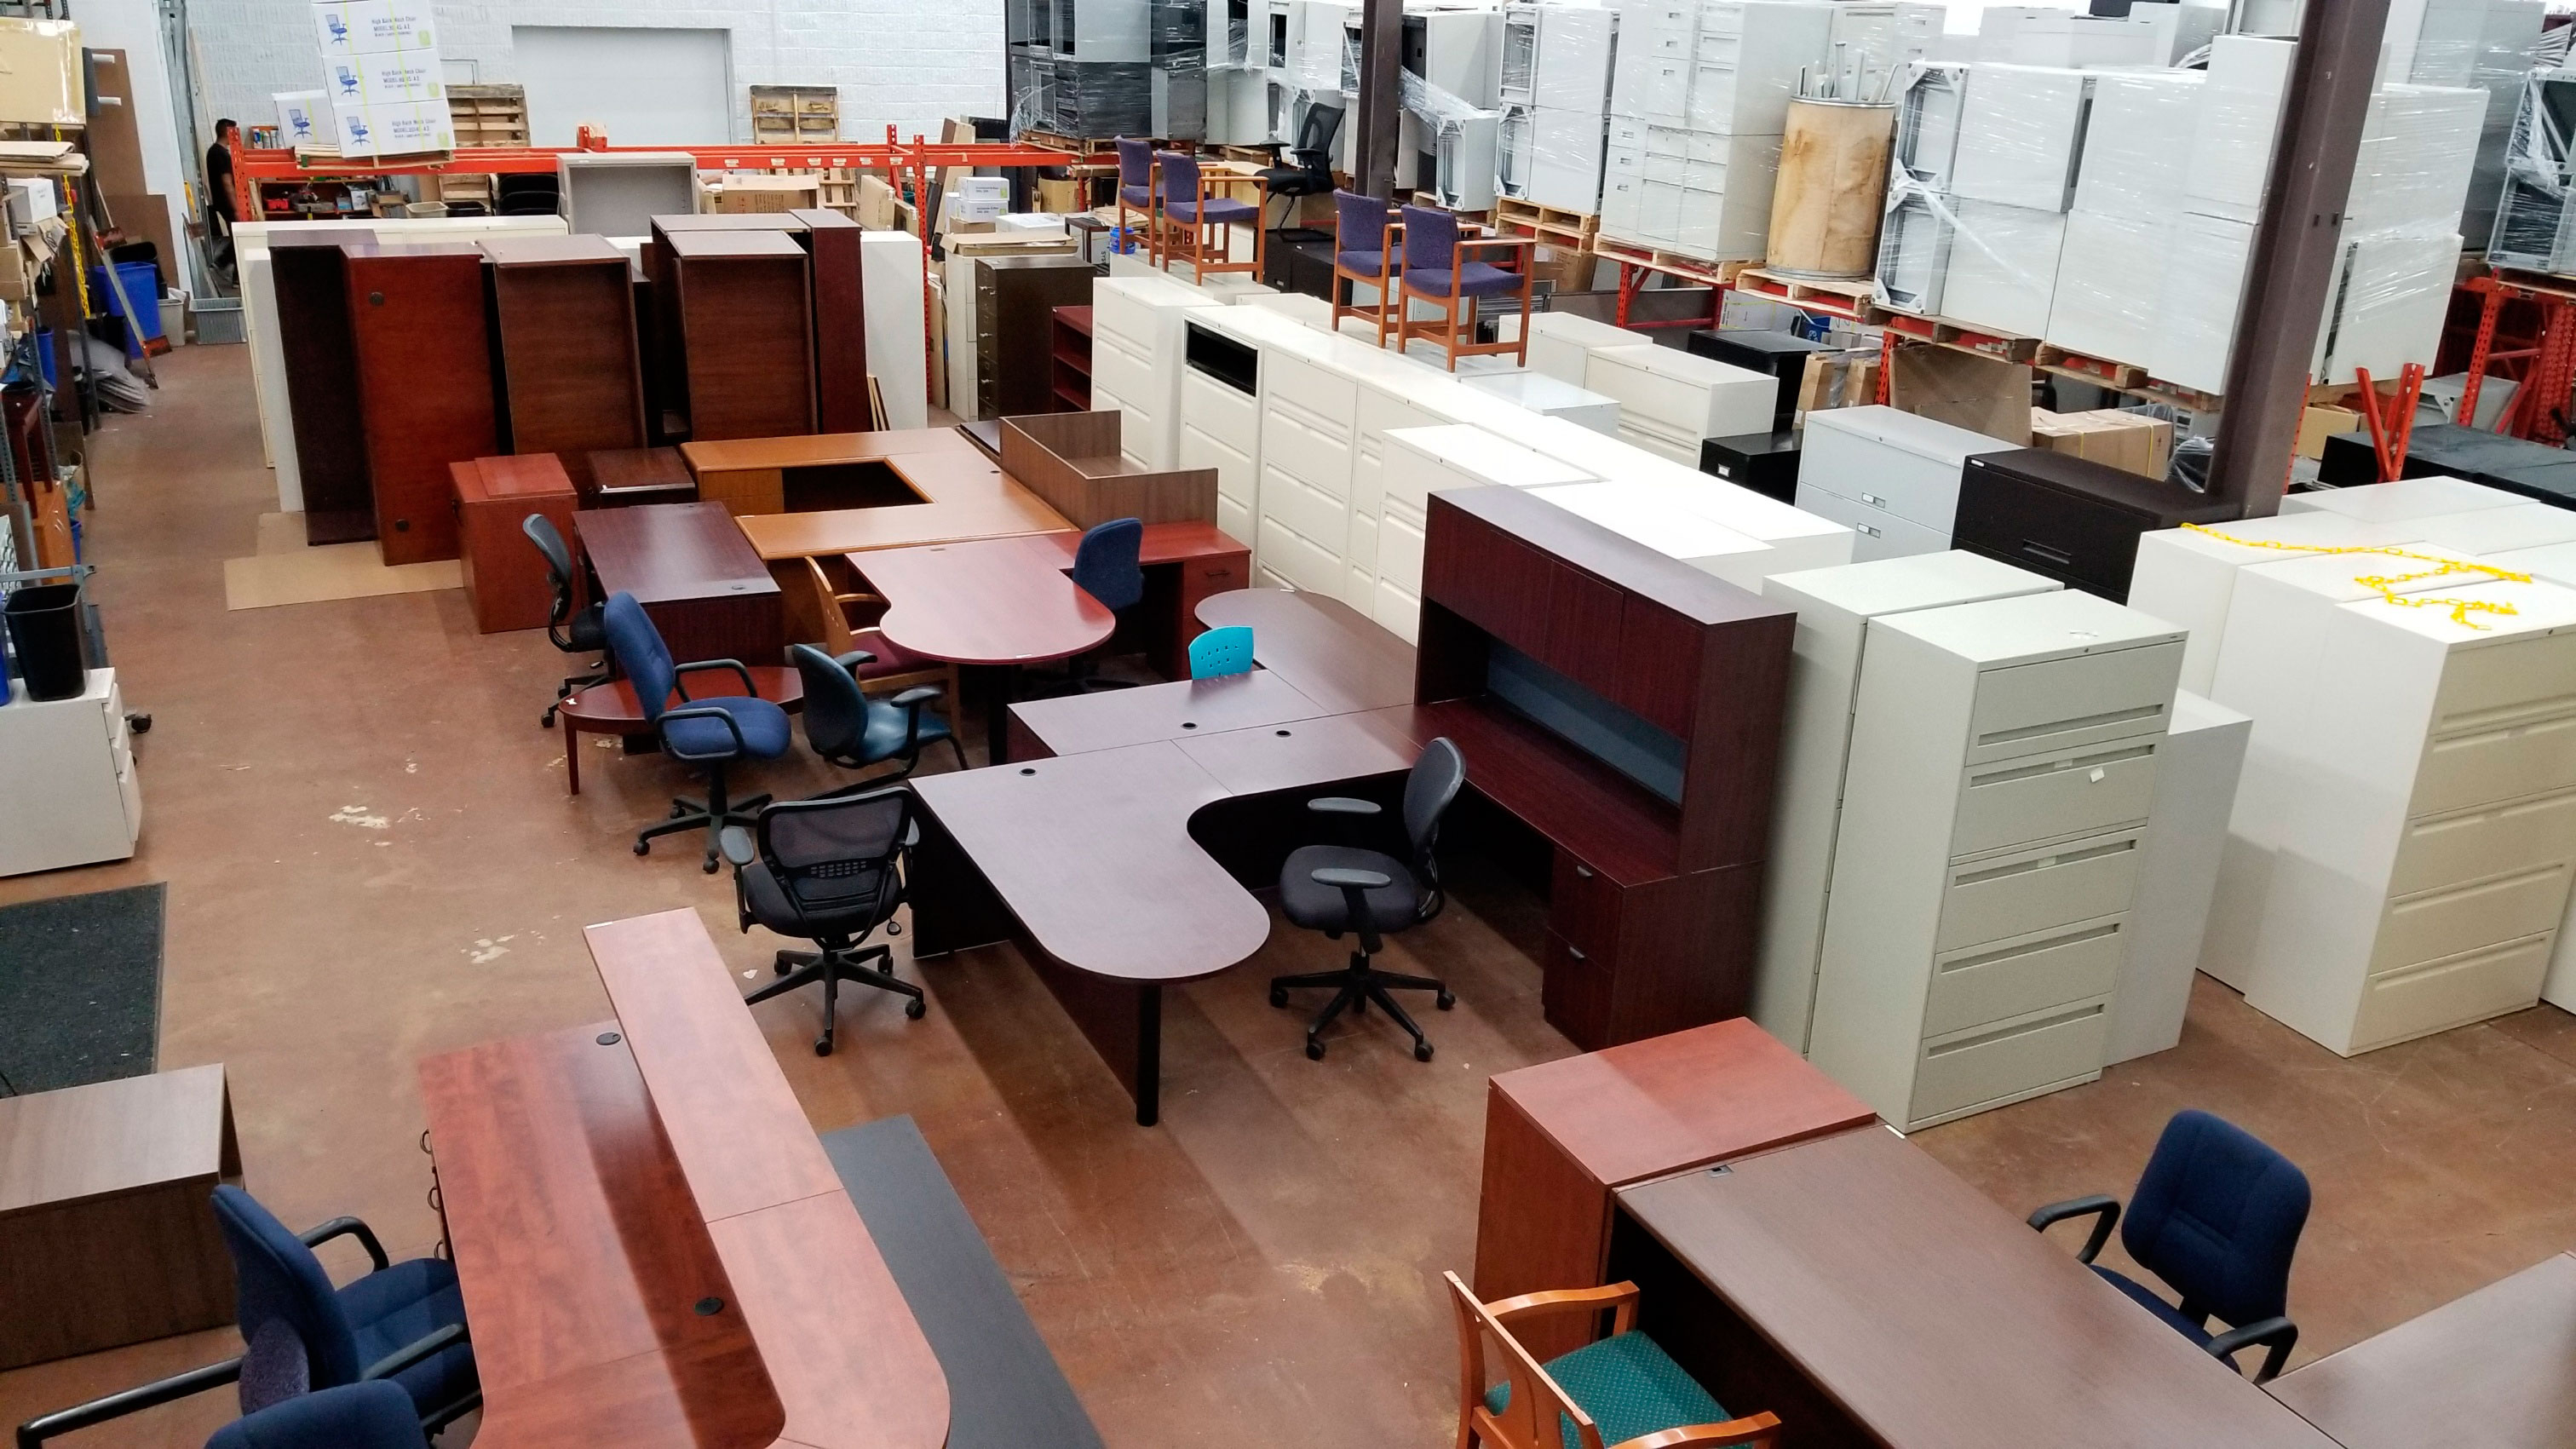 New And Used Office Furniture | Minneapolis St. Paul intended for Used Office Furniture Minneapolis